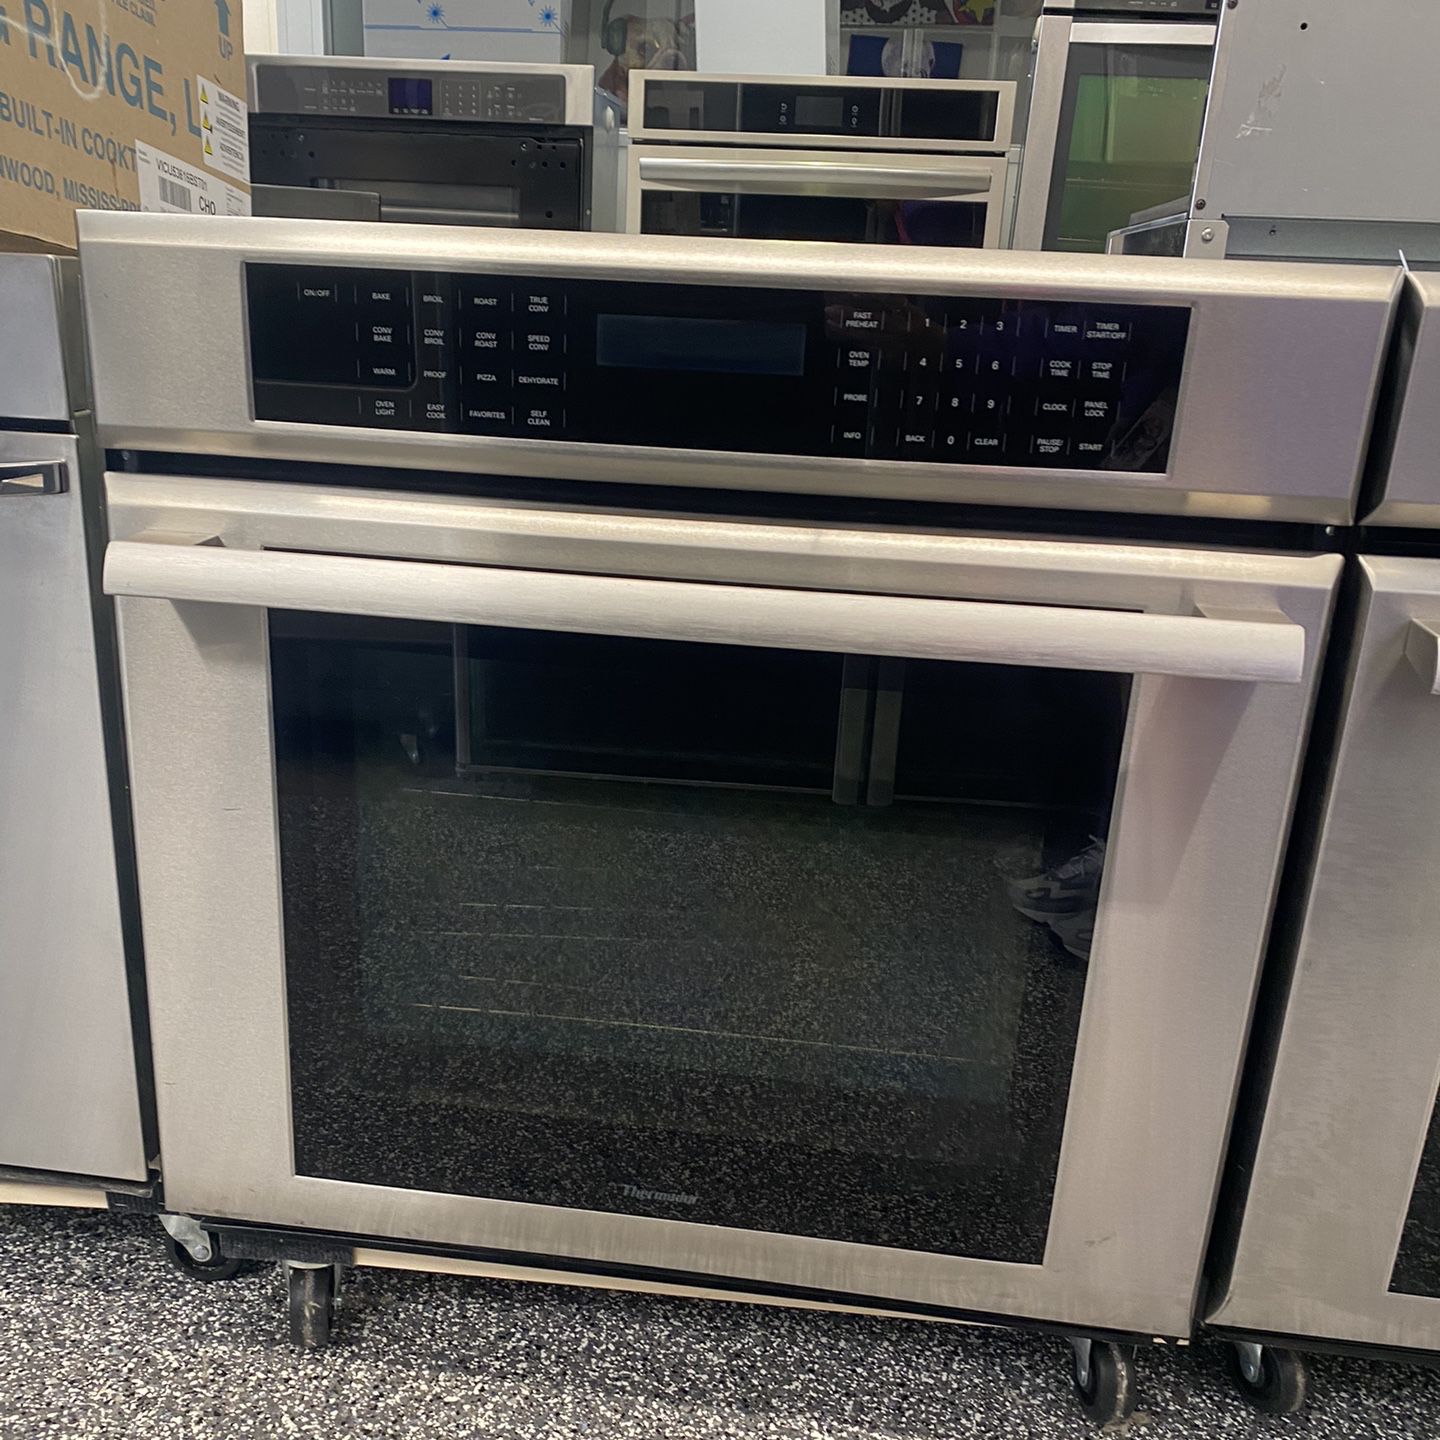 30” Thermador Single Wall Oven 